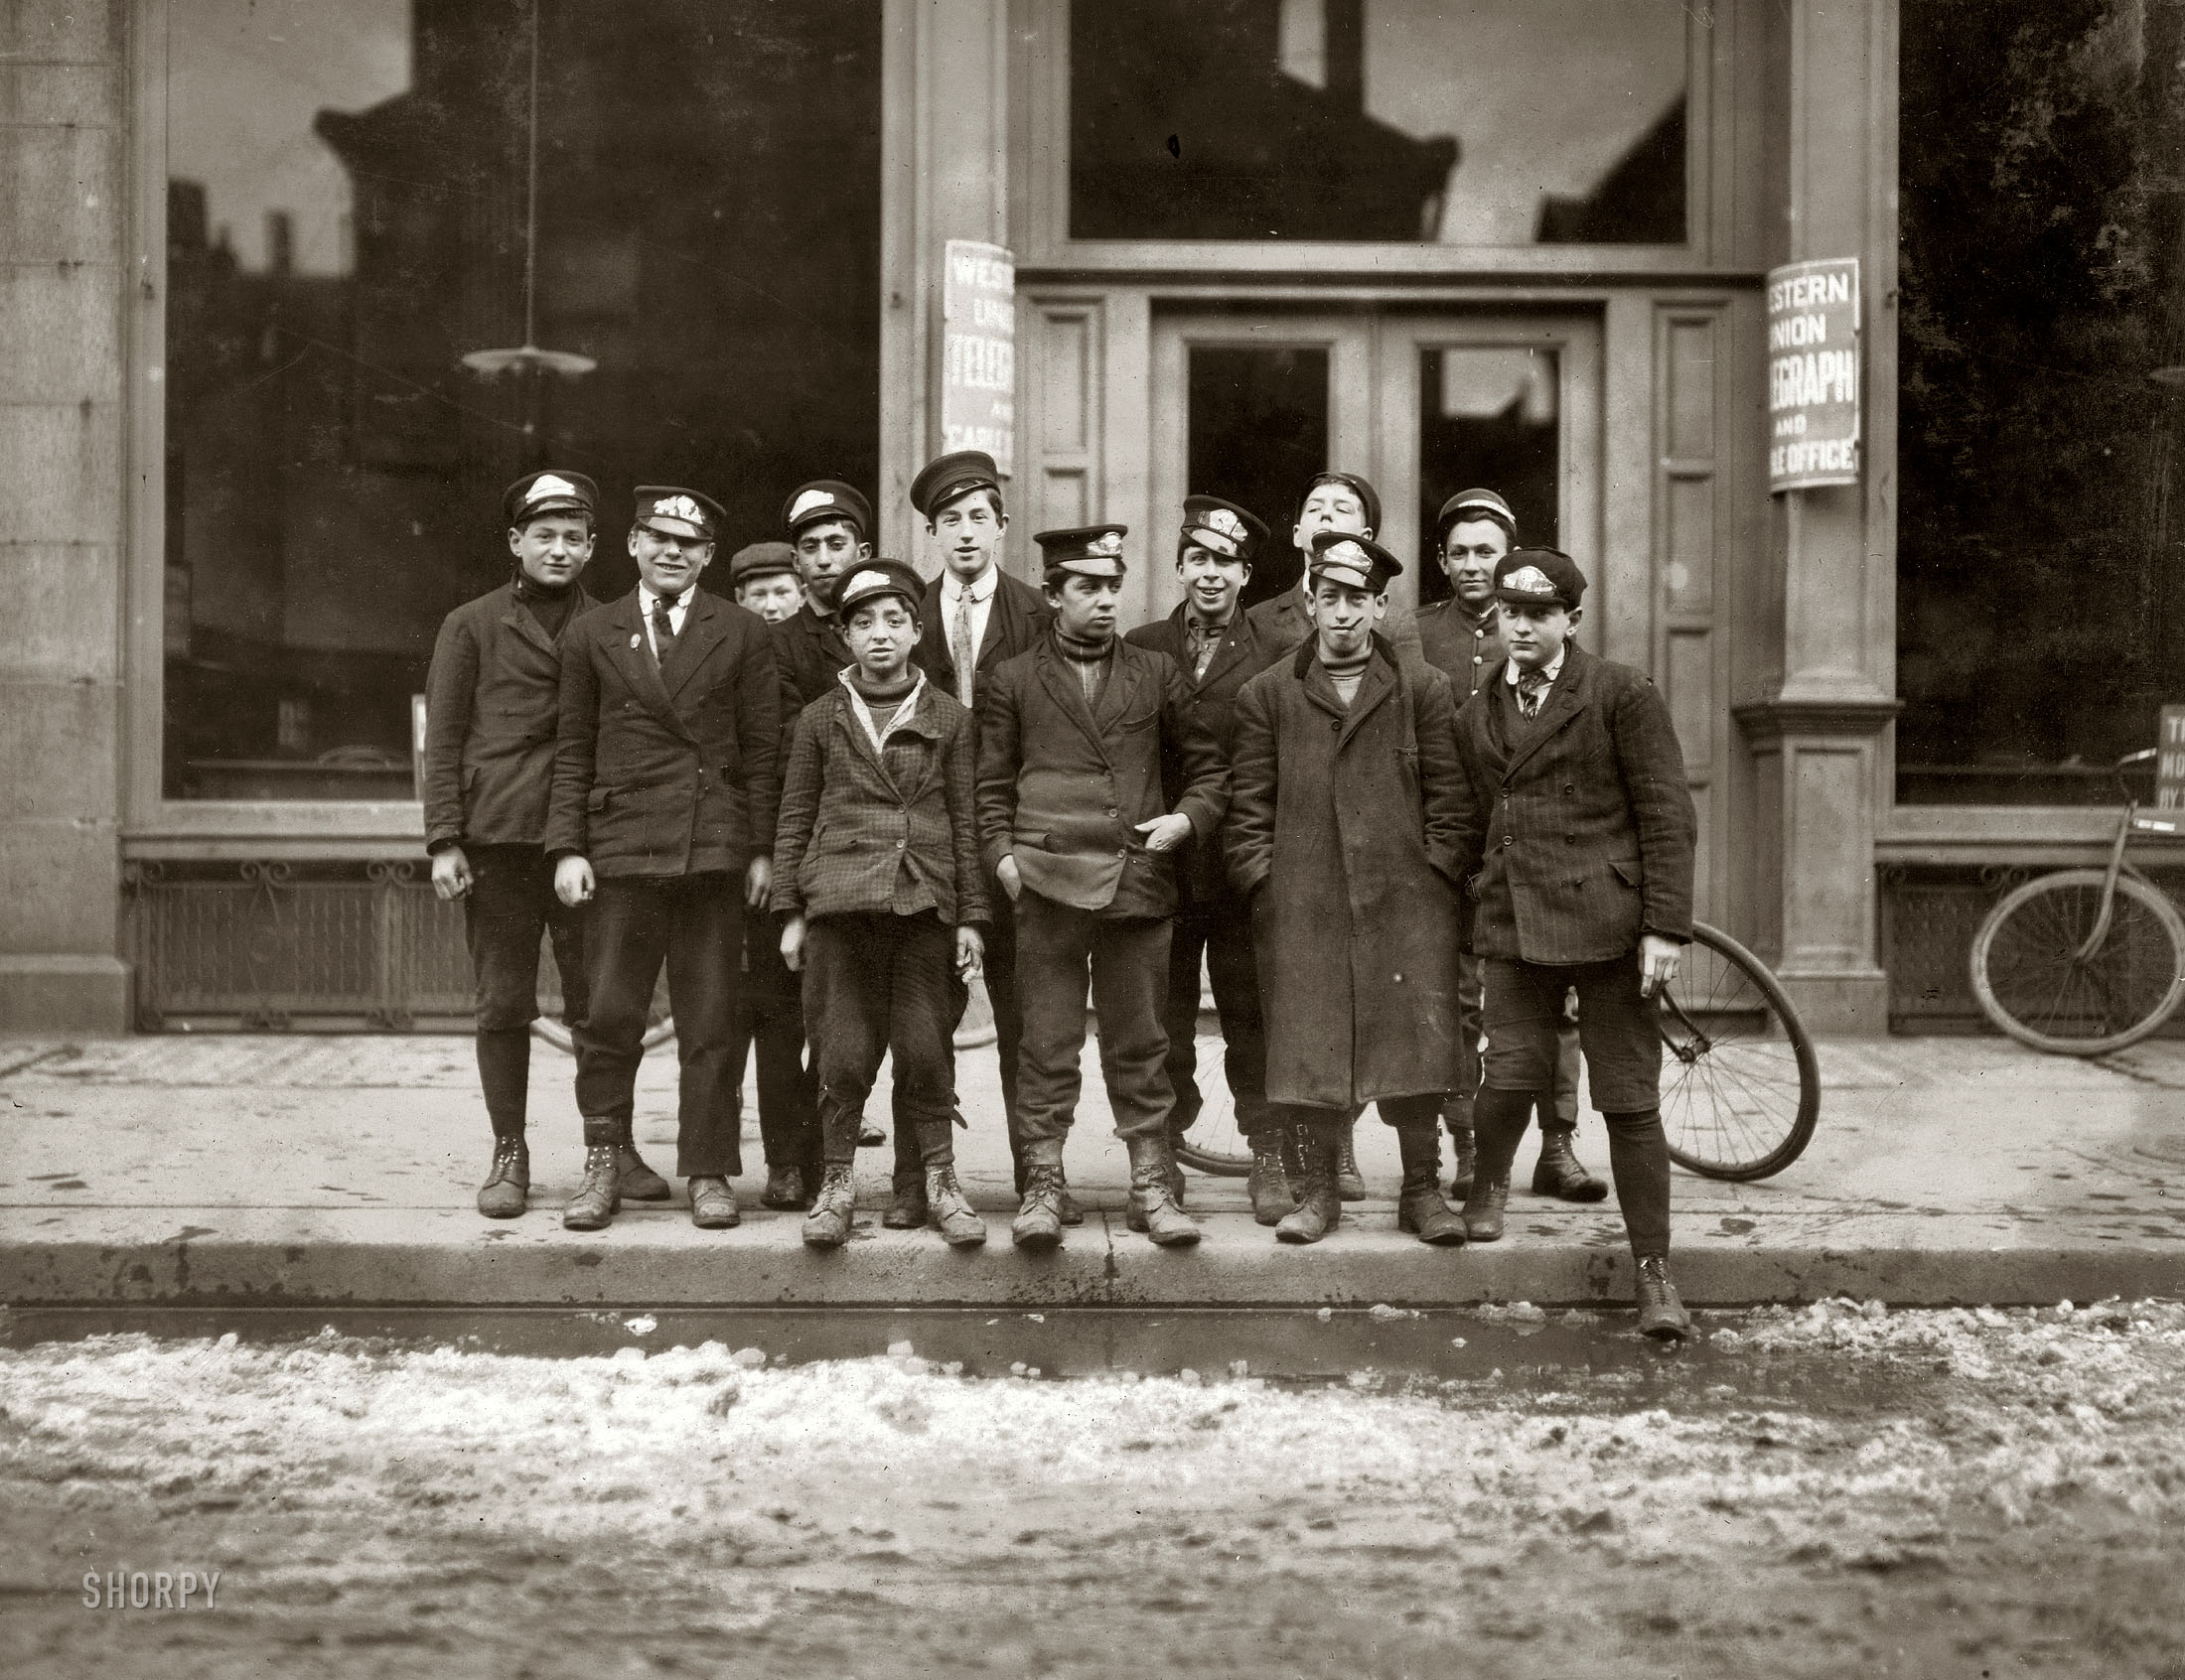 March 8, 1909. New Haven, Connecticut. "Telegraph messenger boys. They work until 11 p.m." Photo and caption by Lewis Wickes Hine. View full size.